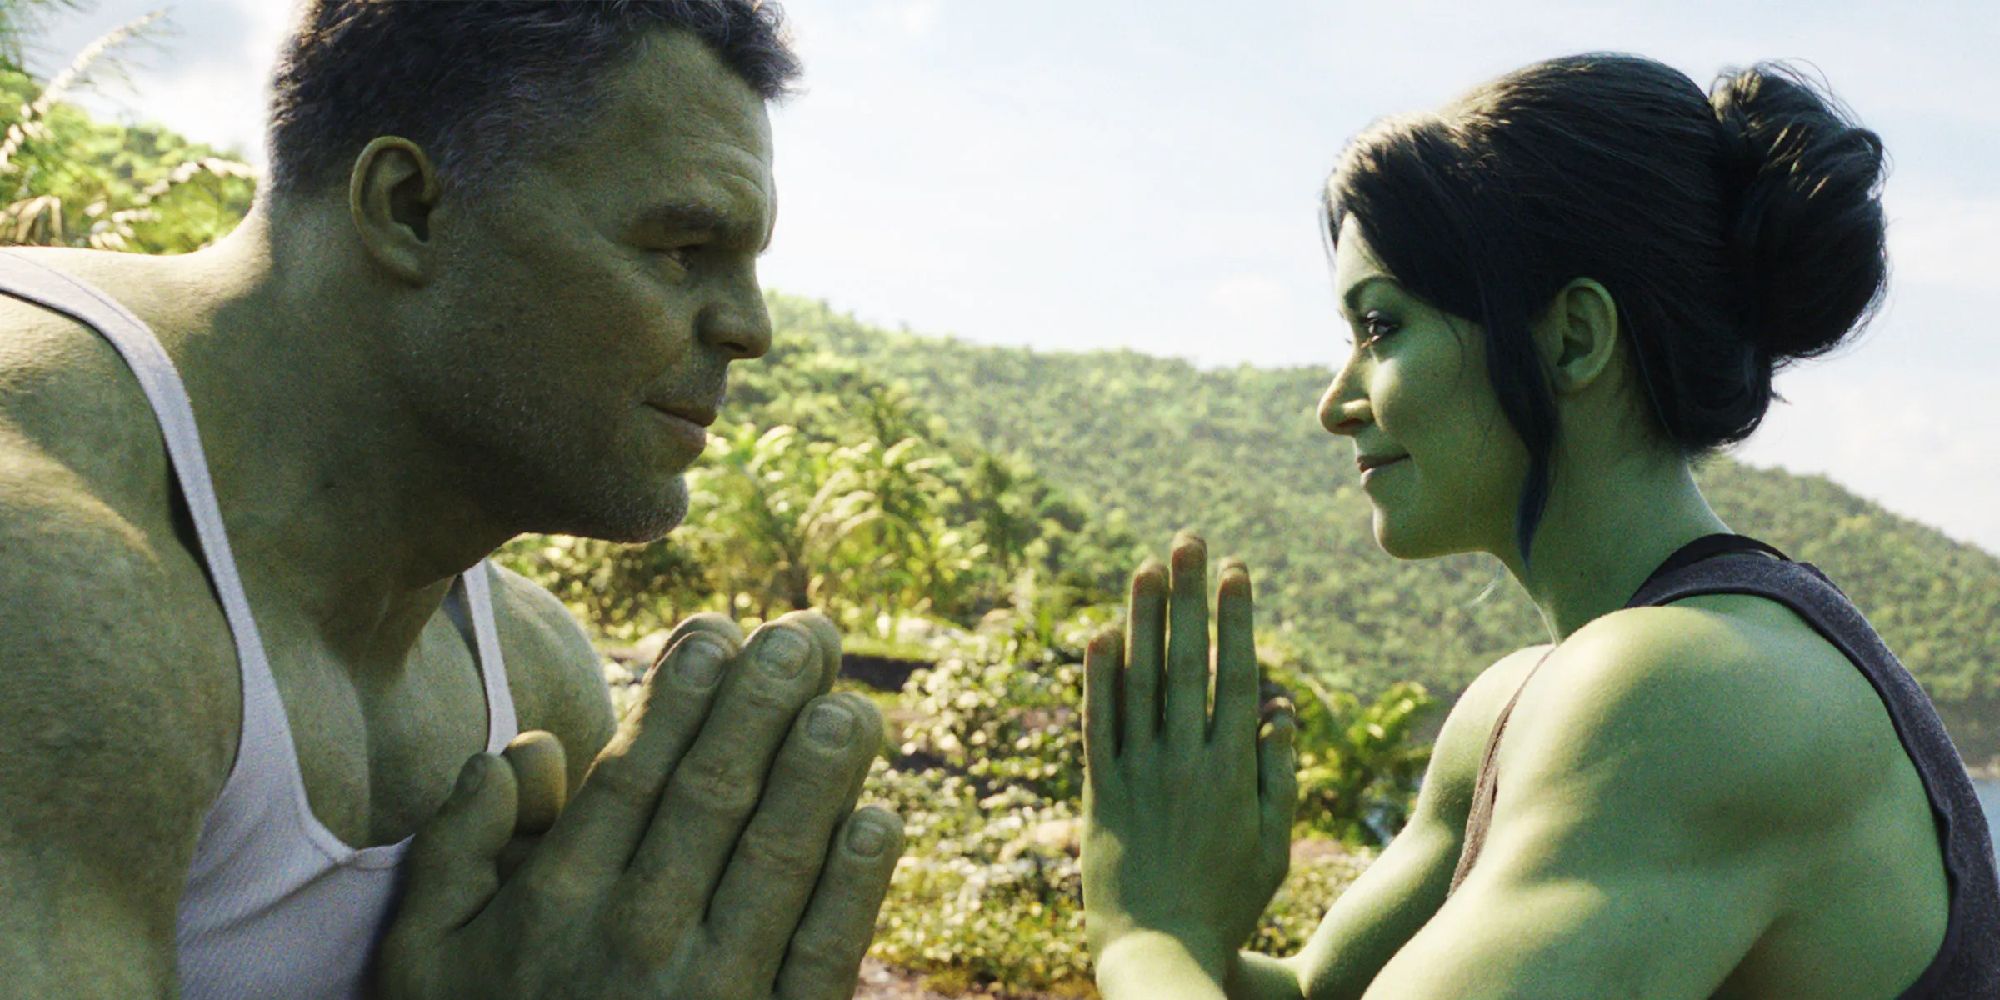 Hulk and She-Hulk training together in "She-Hulk: Attorney-at-Law"